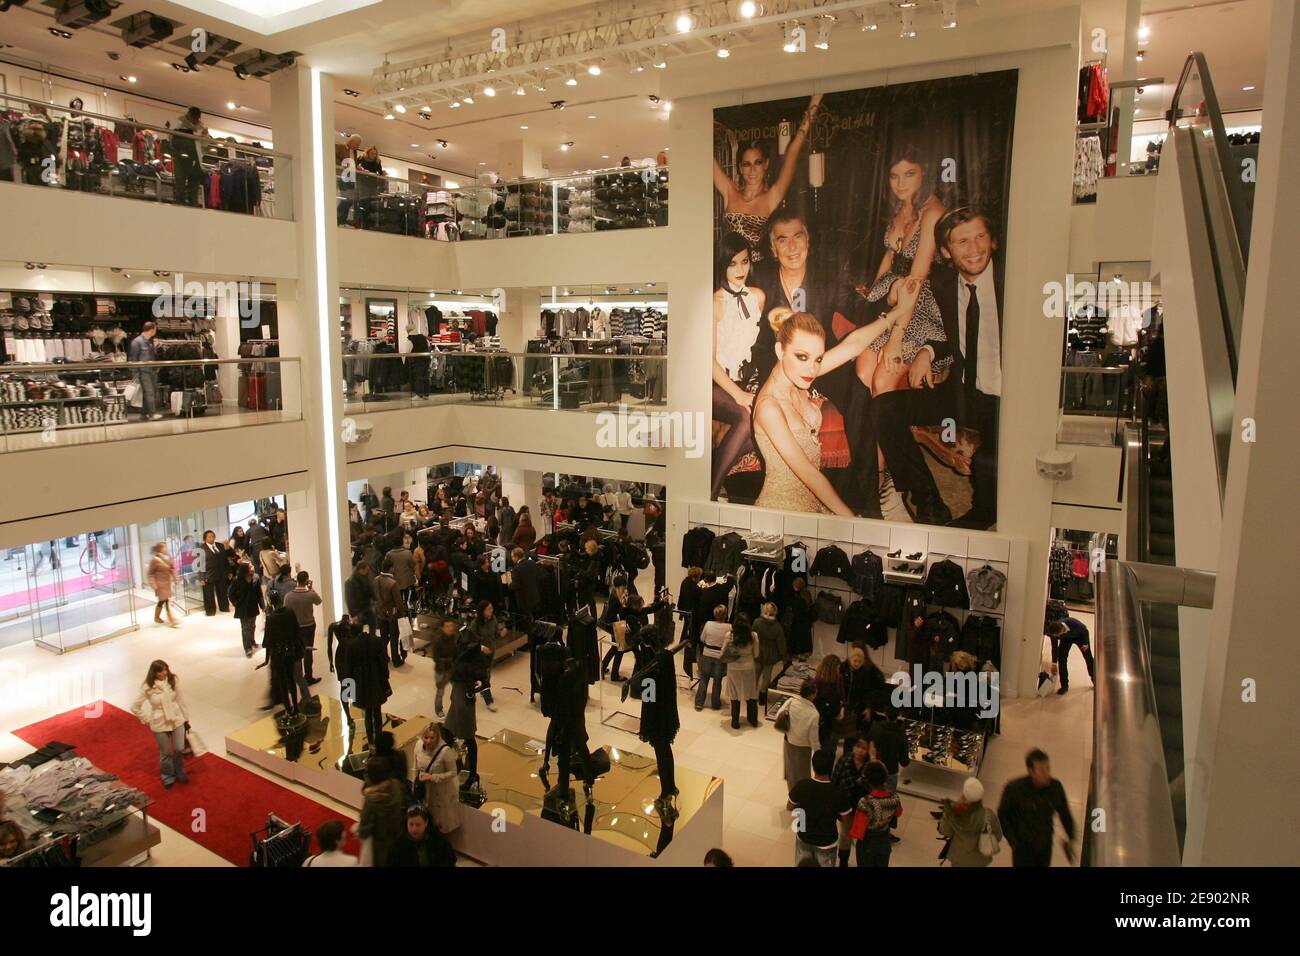 Atmosphere during the Roberto Cavalli at H&M collection launch, held at the  H&M megastore on 5th